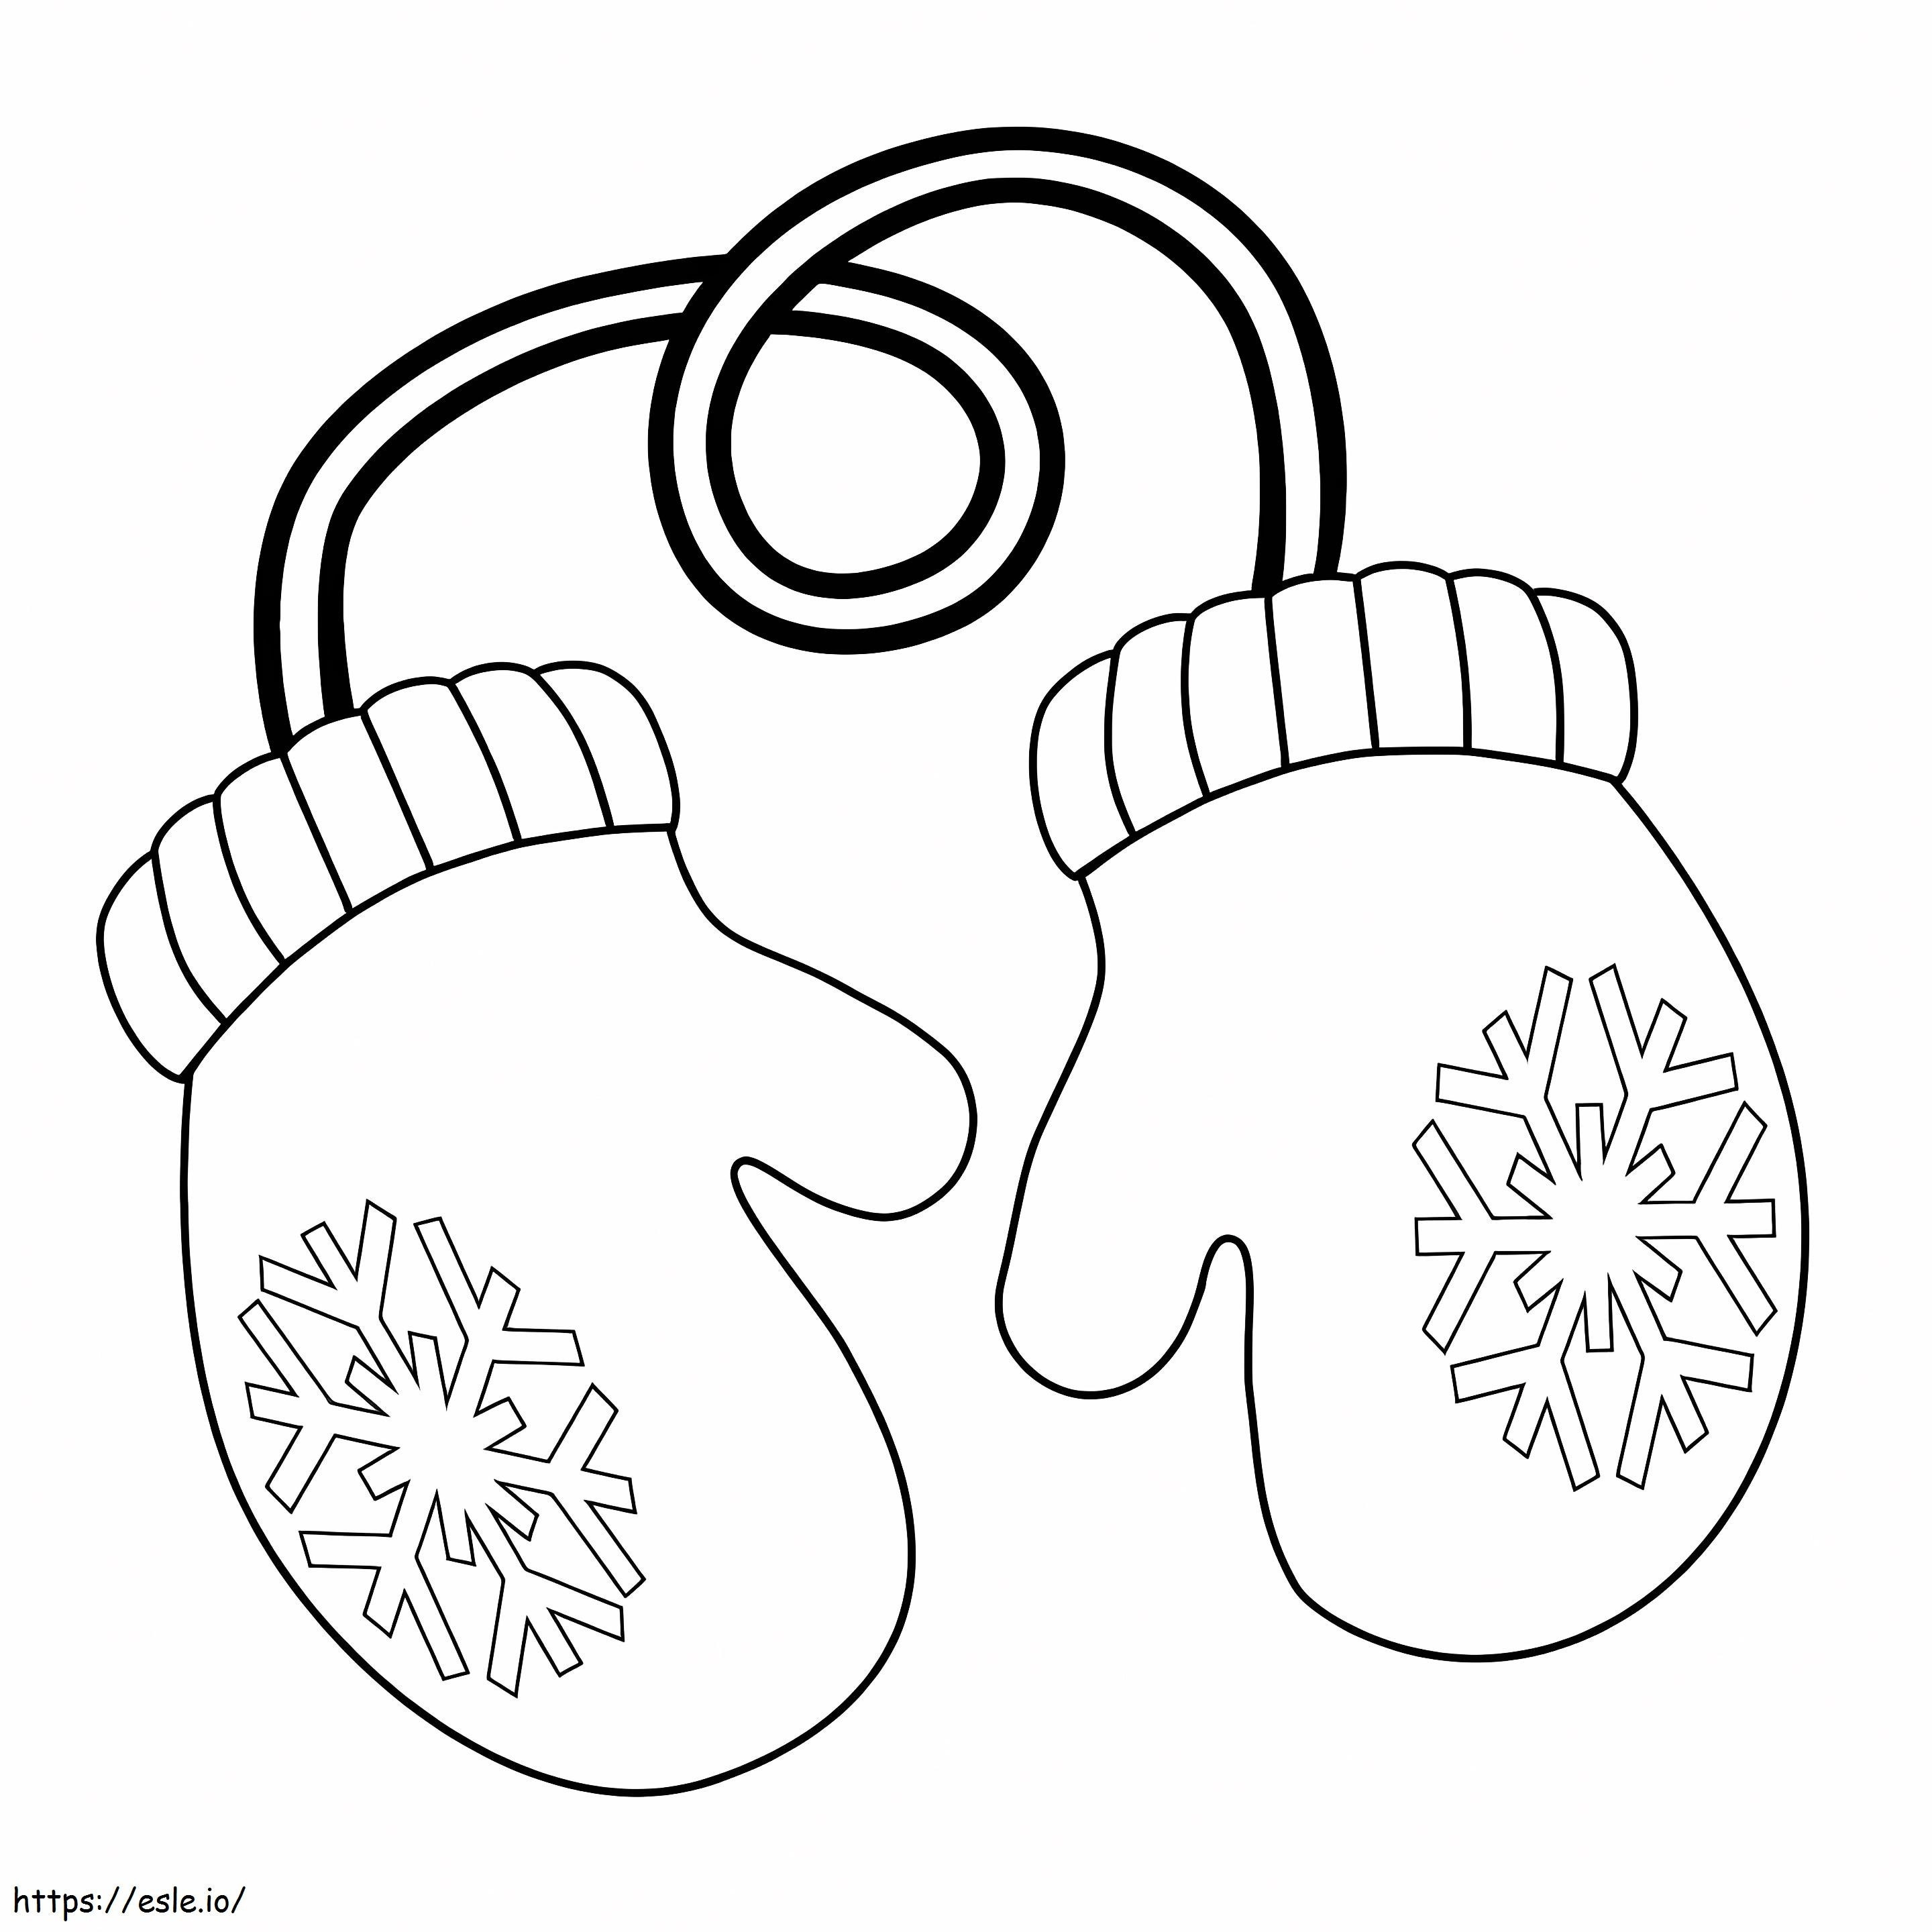 Cute Mittens coloring page